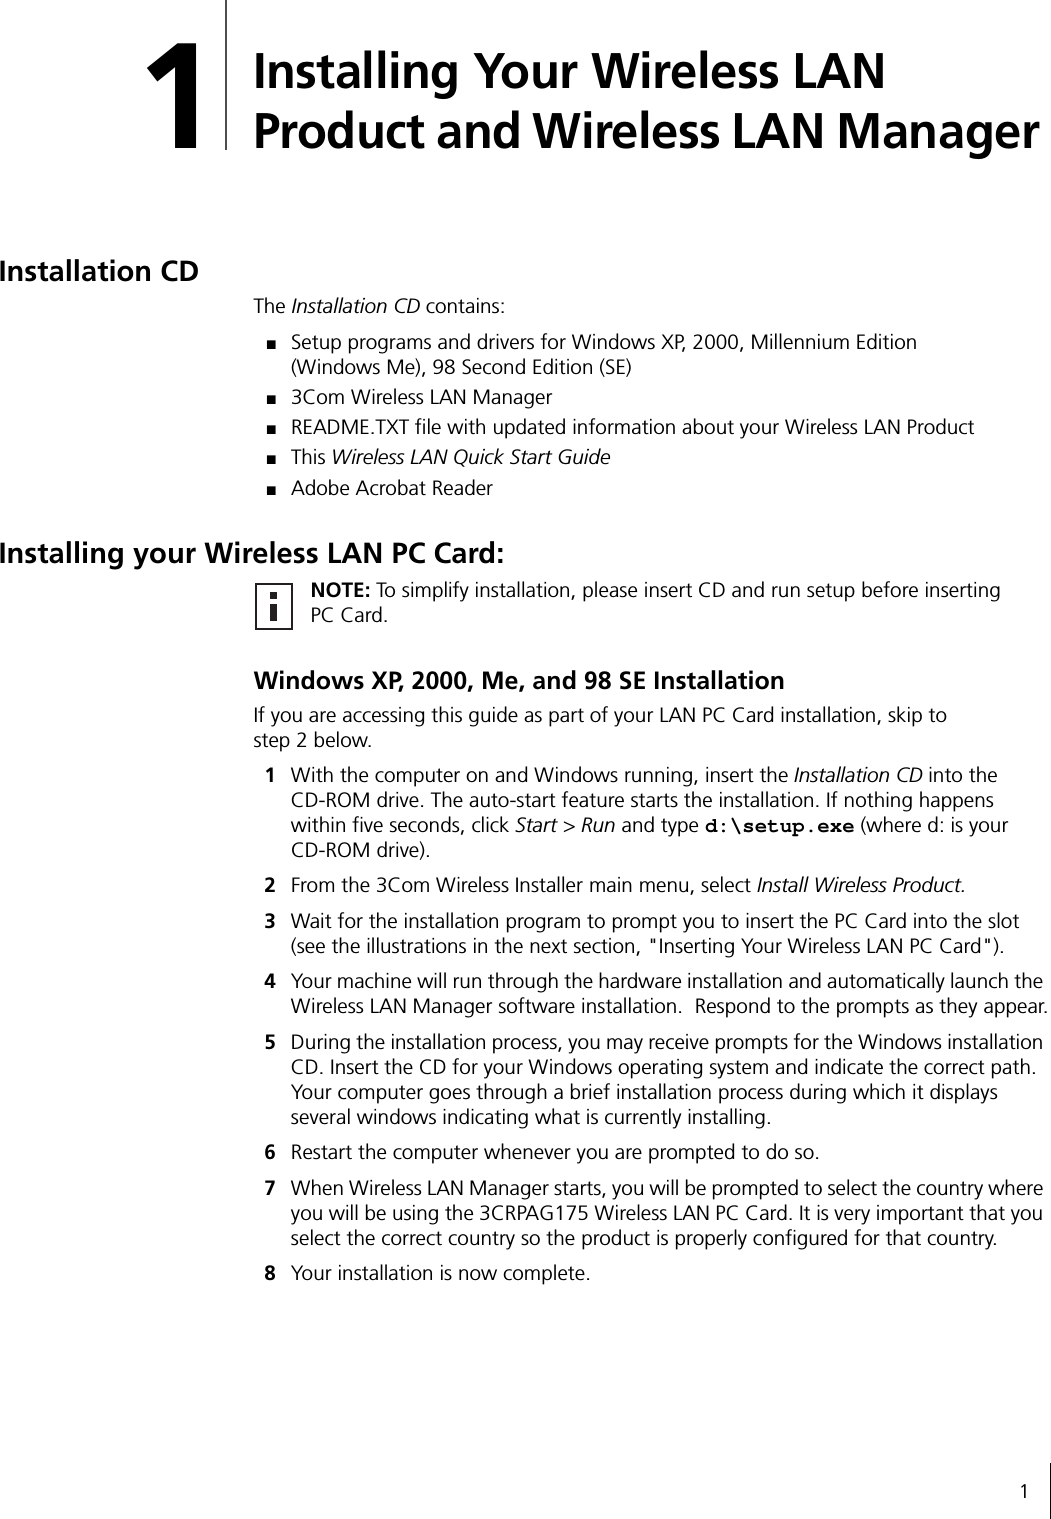 11Installing Your Wireless LAN Product and Wireless LAN Manager Installation CD The Installation CD contains:■Setup programs and drivers for Windows XP, 2000, Millennium Edition (Windows Me), 98 Second Edition (SE)■3Com Wireless LAN Manager■README.TXT file with updated information about your Wireless LAN Product■This Wireless LAN Quick Start Guide■Adobe Acrobat ReaderInstalling your Wireless LAN PC Card:Windows XP, 2000, Me, and 98 SE InstallationIf you are accessing this guide as part of your LAN PC Card installation, skip to step 2 below.1With the computer on and Windows running, insert the Installation CD into the CD-ROM drive. The auto-start feature starts the installation. If nothing happens within five seconds, click Start &gt; Run and type d:\setup.exe (where d: is your CD-ROM drive).2From the 3Com Wireless Installer main menu, select Install Wireless Product.3Wait for the installation program to prompt you to insert the PC Card into the slot (see the illustrations in the next section, &quot;Inserting Your Wireless LAN PC Card&quot;).4Your machine will run through the hardware installation and automatically launch the Wireless LAN Manager software installation.  Respond to the prompts as they appear.5During the installation process, you may receive prompts for the Windows installation CD. Insert the CD for your Windows operating system and indicate the correct path.  Your computer goes through a brief installation process during which it displays several windows indicating what is currently installing.6Restart the computer whenever you are prompted to do so.7When Wireless LAN Manager starts, you will be prompted to select the country where you will be using the 3CRPAG175 Wireless LAN PC Card. It is very important that you select the correct country so the product is properly configured for that country.8Your installation is now complete.NOTE: To simplify installation, please insert CD and run setup before inserting PC Card.